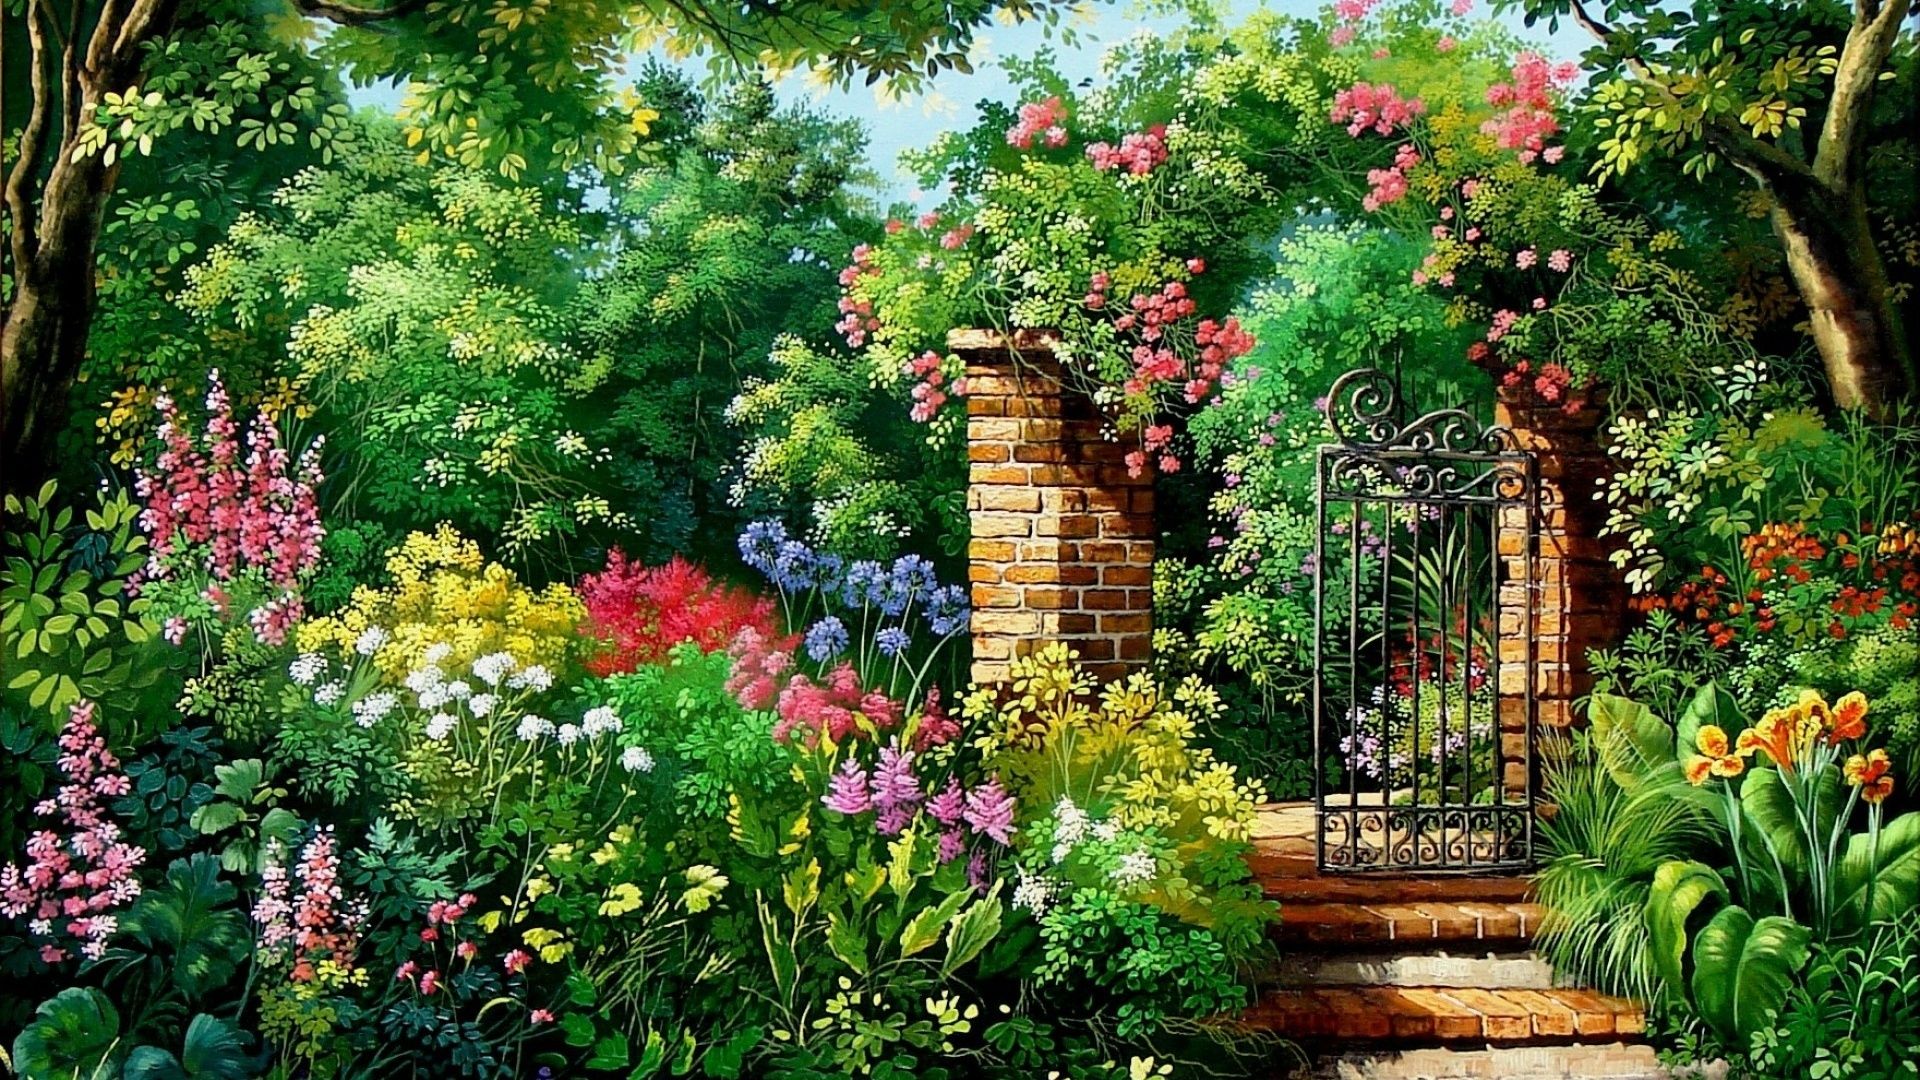 A painting of a garden with flowers and a gate - Garden